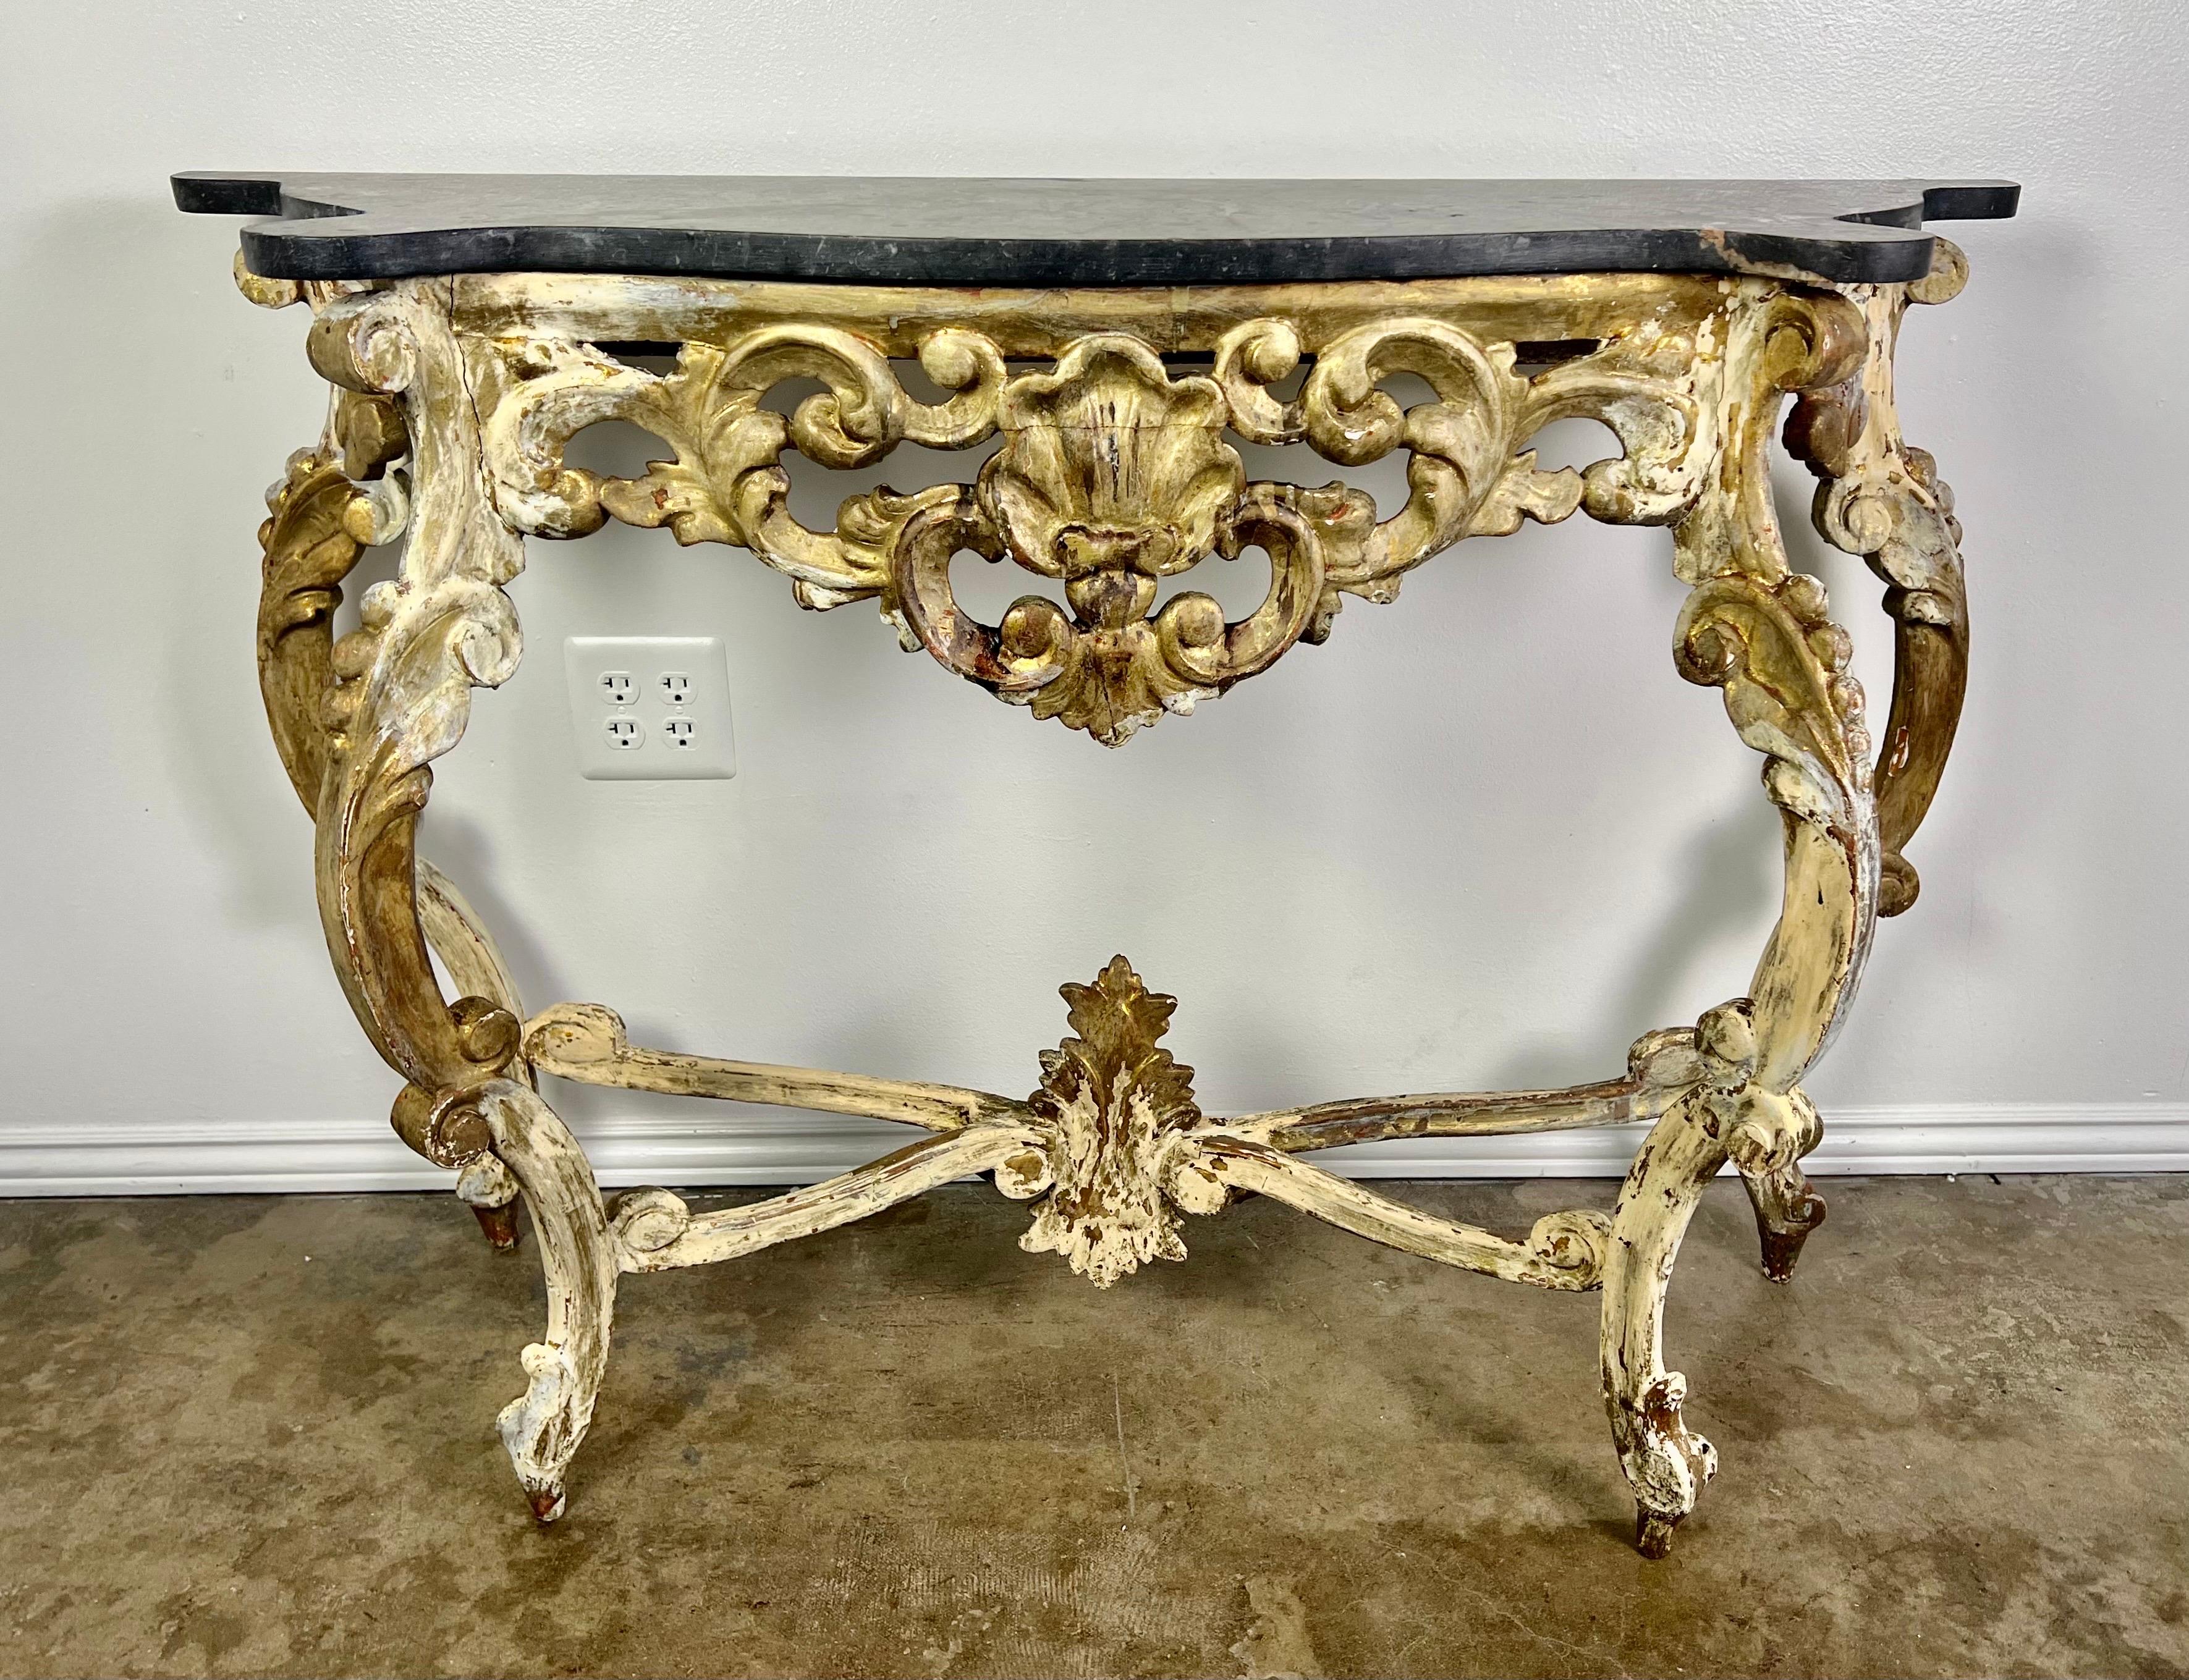 19th century Italian giltwood carved console with black marble top. The console stands on four cabriole legs with rams head feet. The scrolled legs are attached by a center stretcher that meets at a center finial. The front of the console is adorned